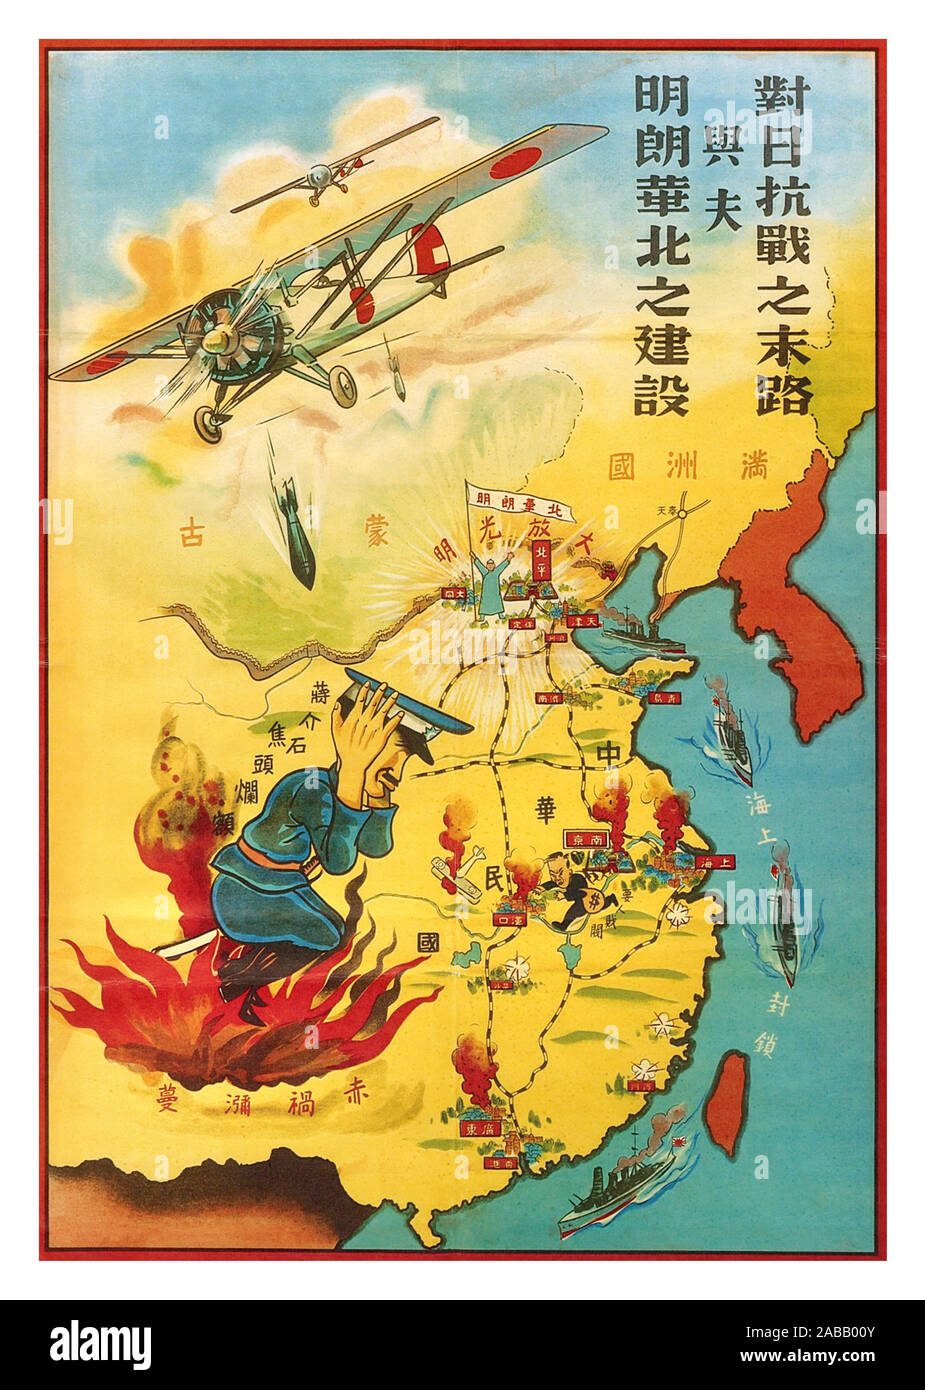 vintage ww2 japanese propaganda poster map last days of the japanese war construction of a liberated north china in the best known raid on june 5 1941 some 4000 civilians were asphyxiated in an air raid shelter tunnel this map was likely produced during that period because the text is in chinese it appears to be a japanese effort to weaken the resolve of the nationalists and their supporters the figure cringing under the japanese bombs falling on western china is captioned chiang kai shek is embattled bruised and battered 2ABB00Y